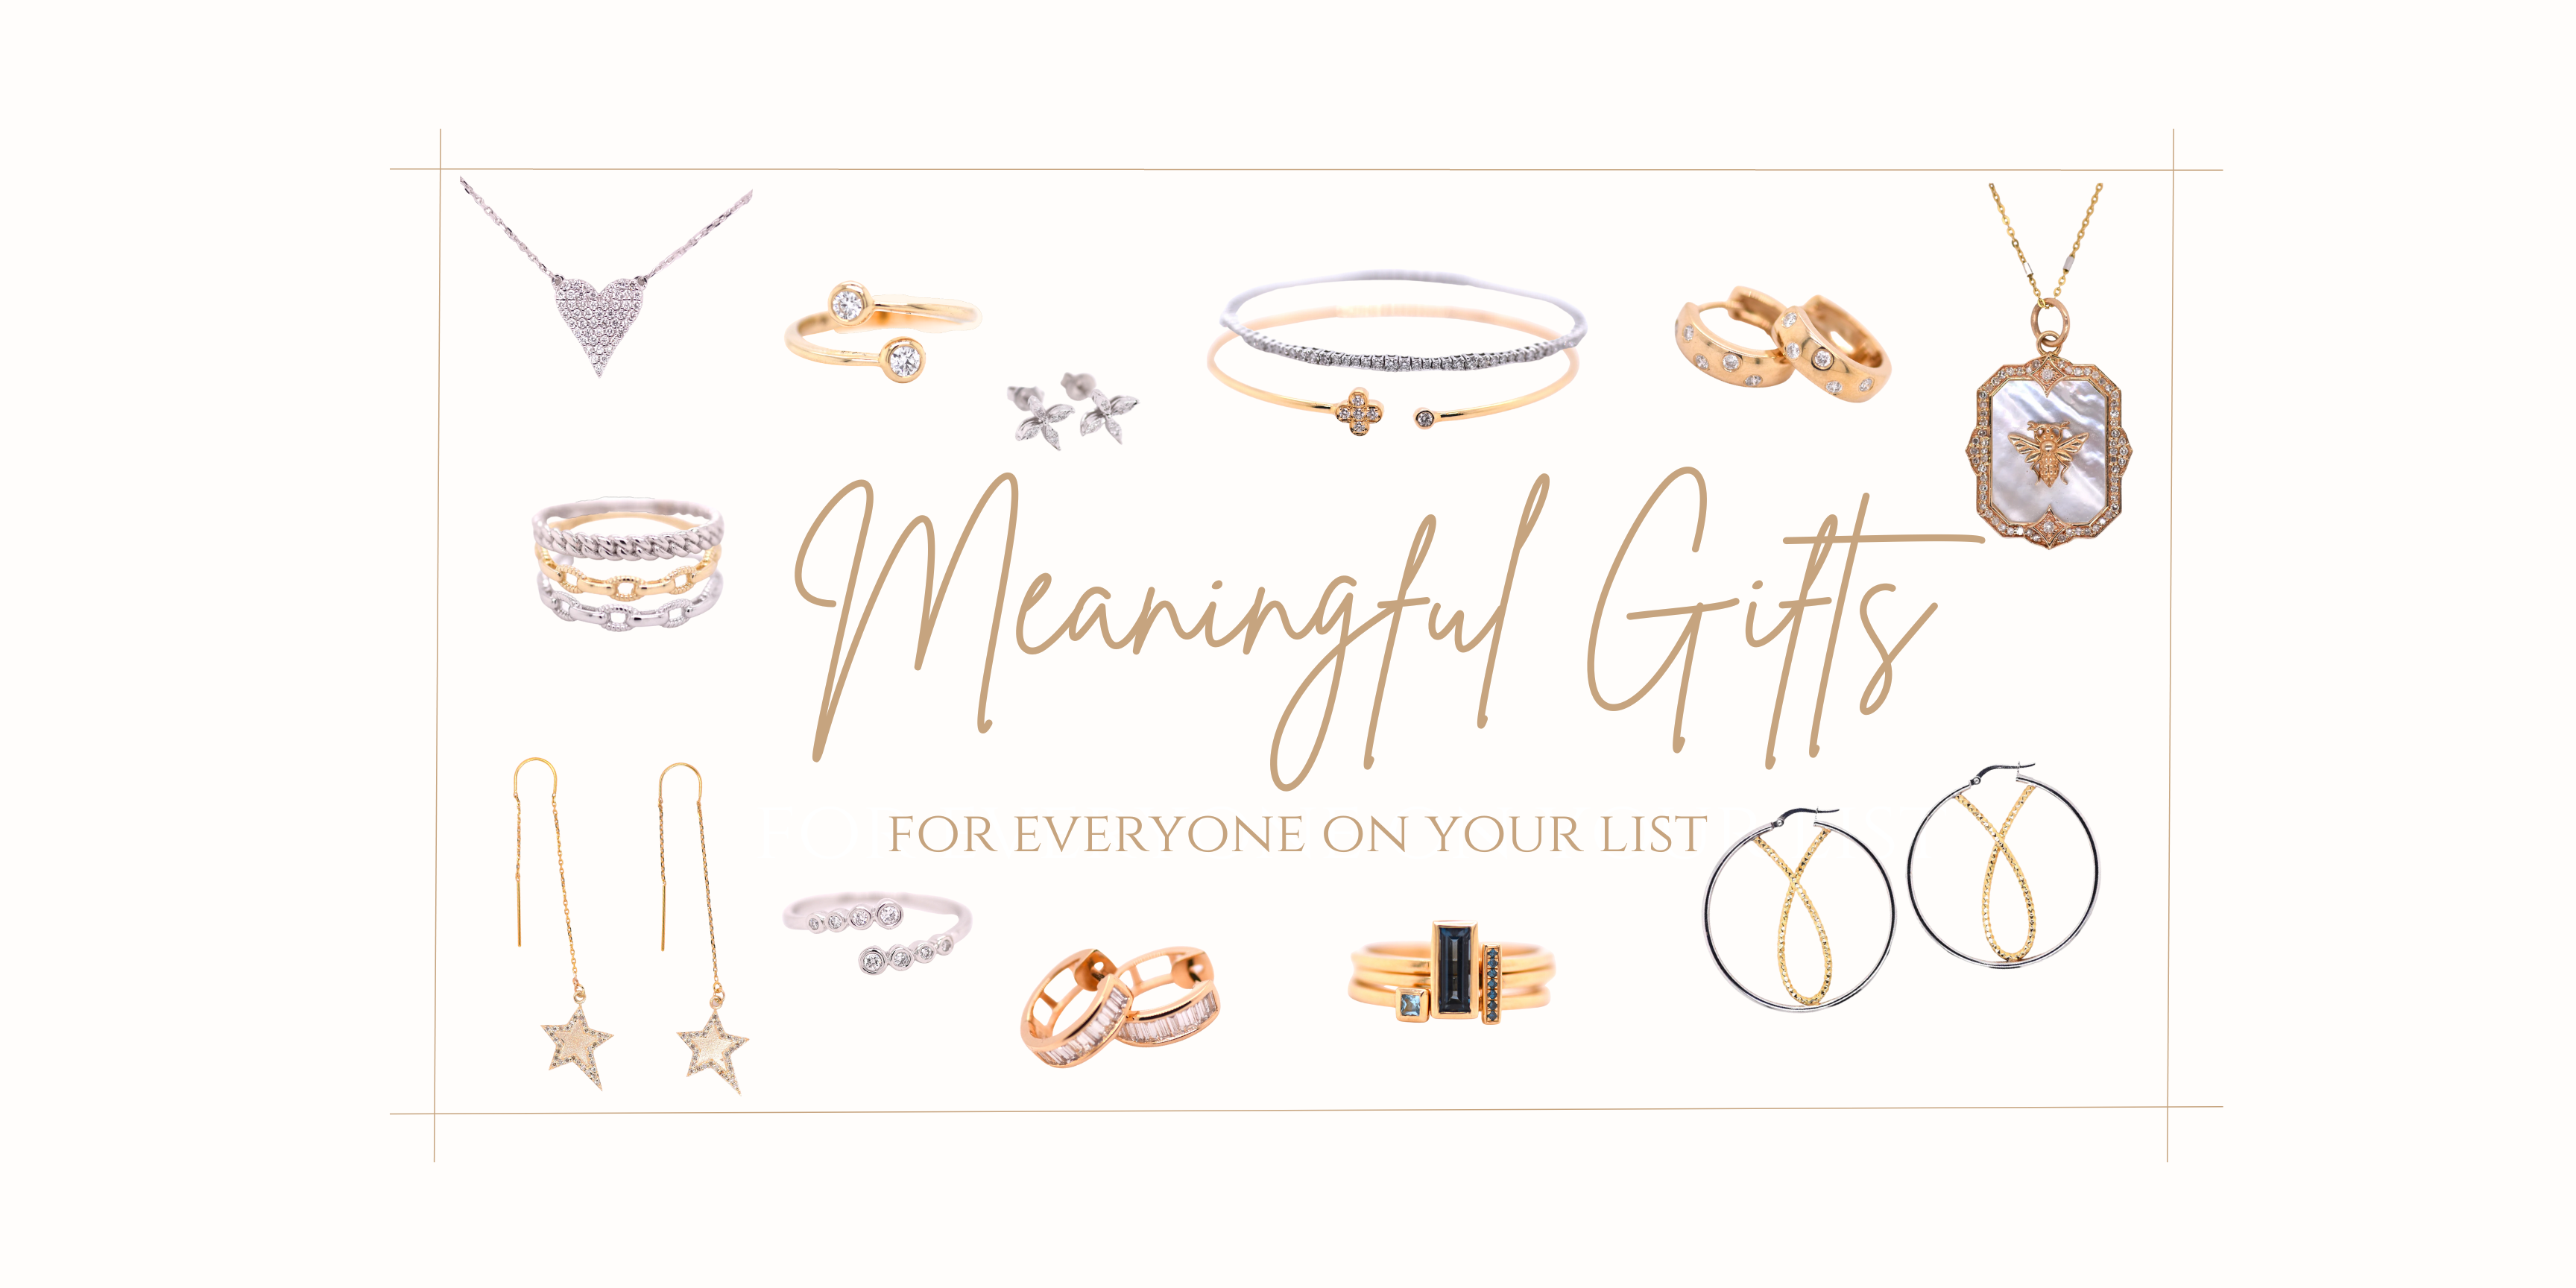 Gifts For Everyone On Your List!